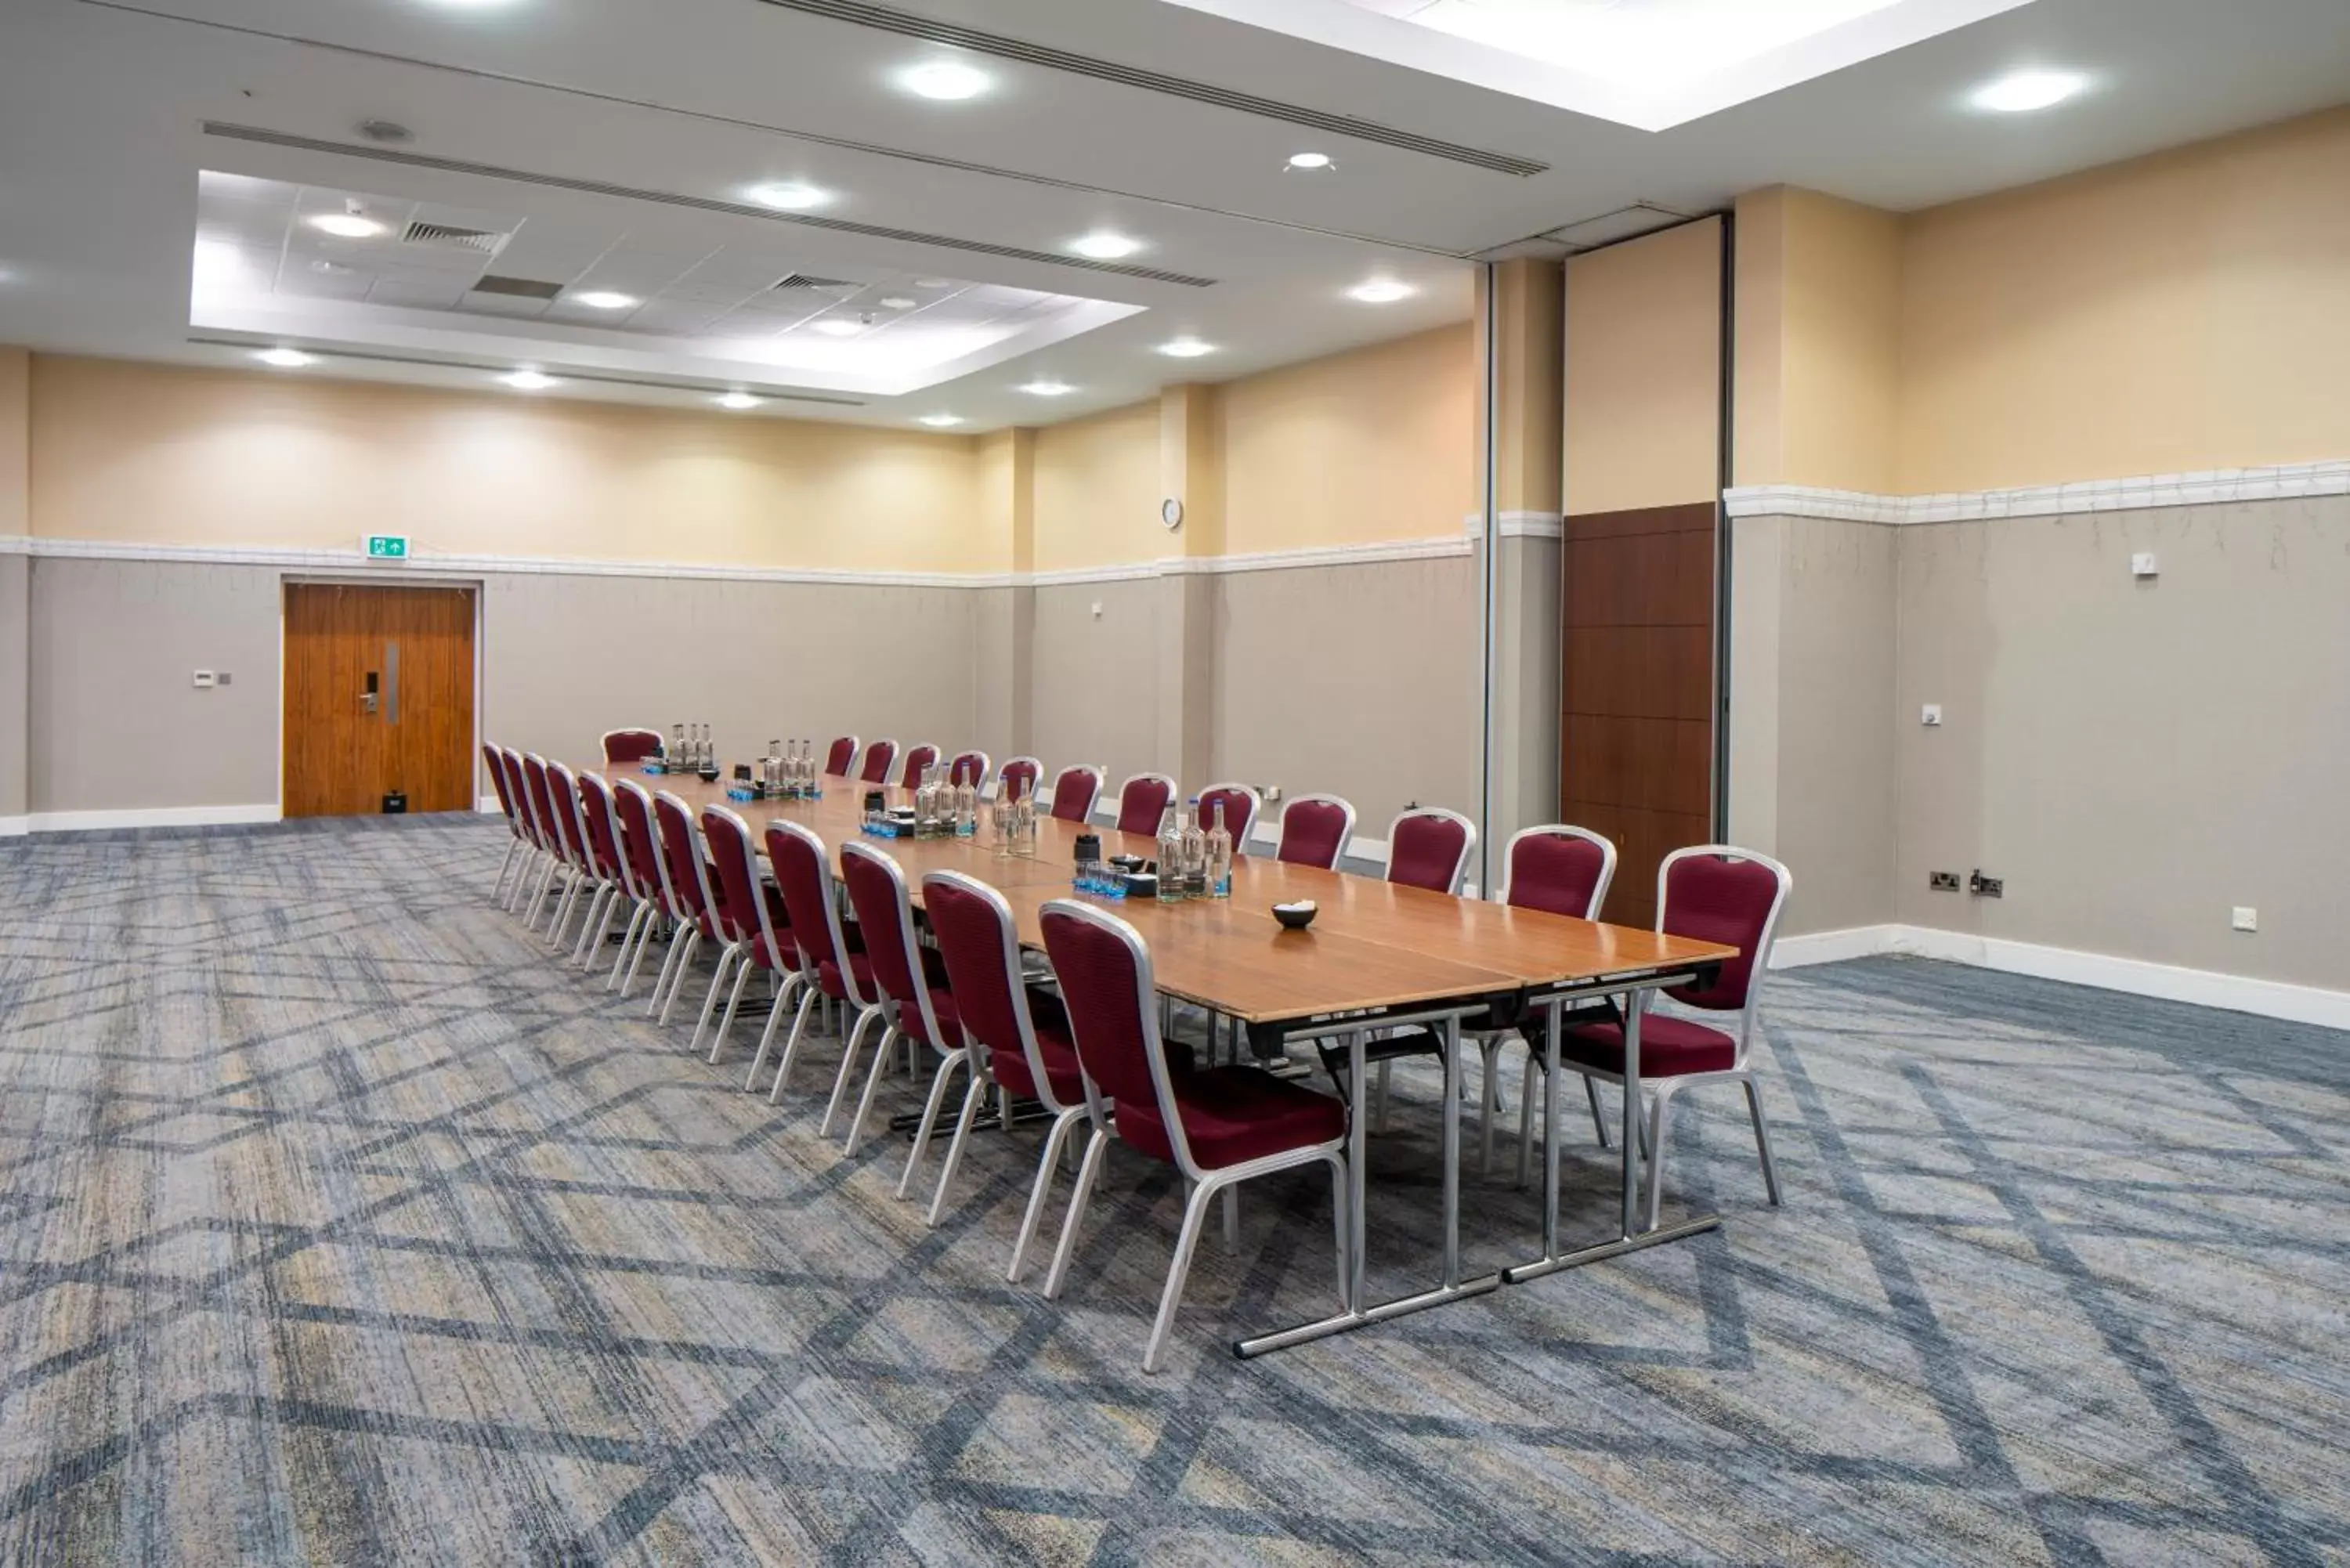 Meeting/conference room in The Telford Hotel, Spa & Golf Resort